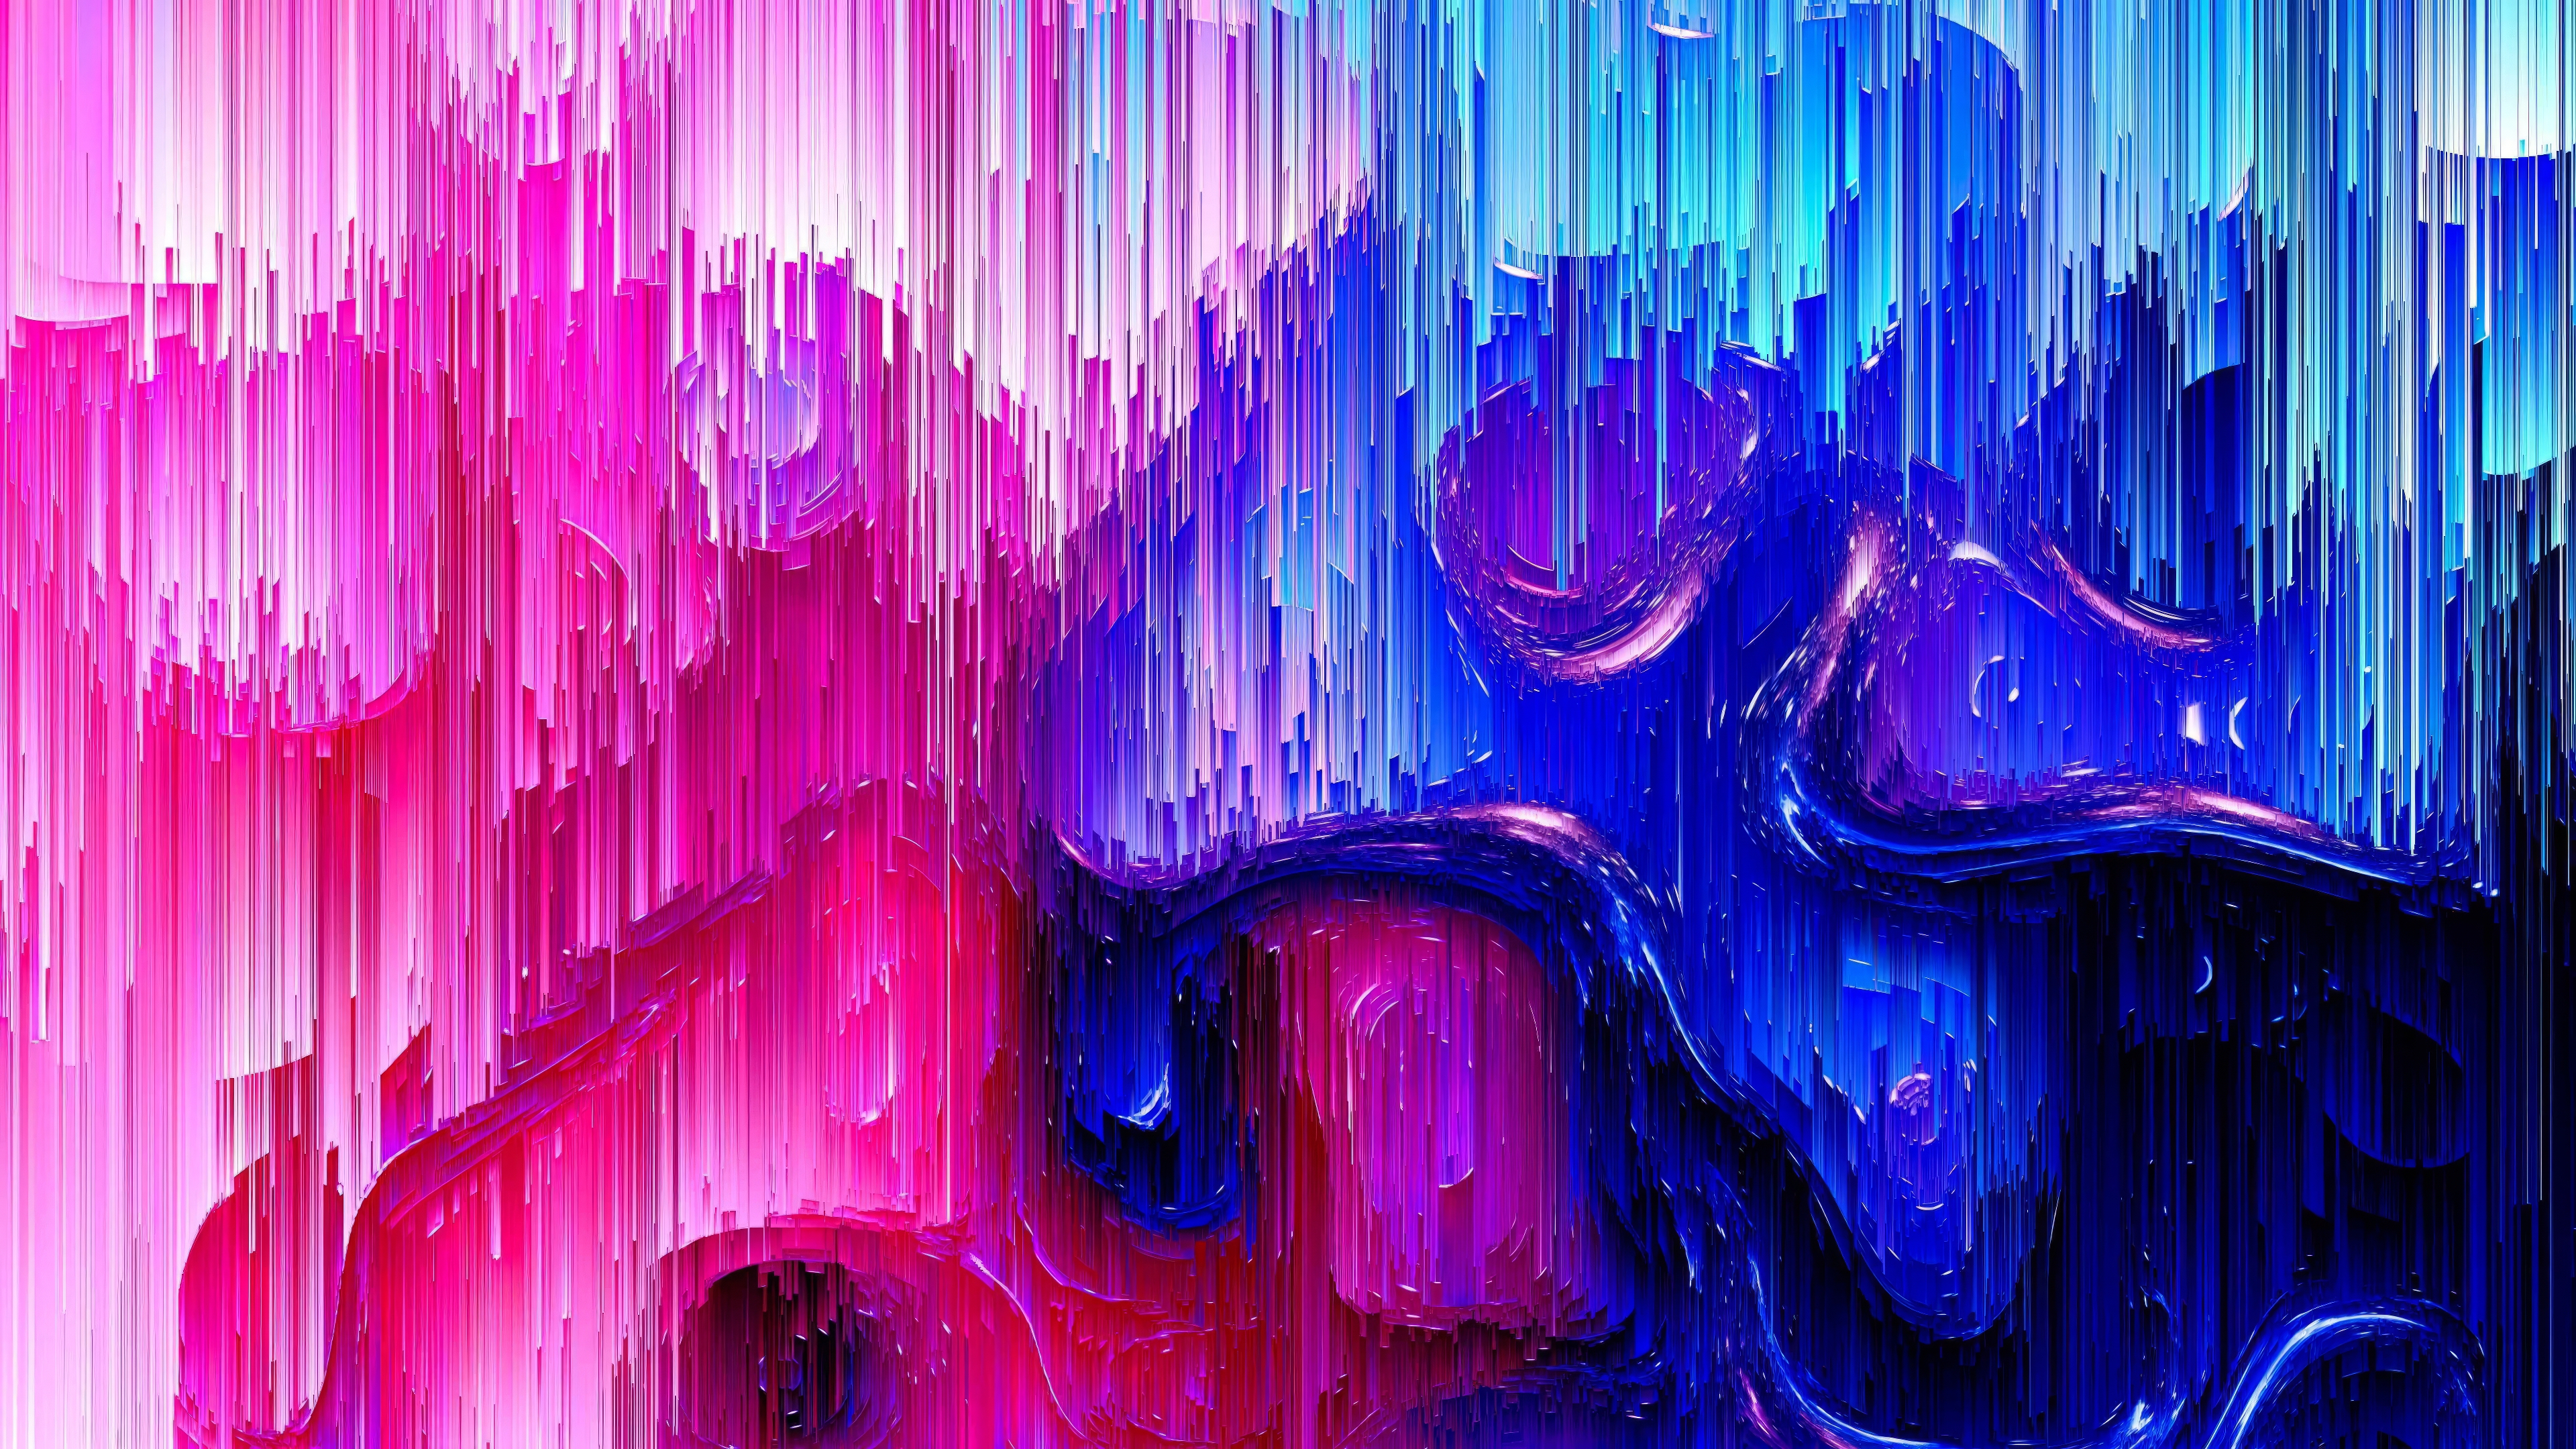 Abstract Glitch Art Vibrant Pink Blue Vertical Lines Pixelated 3840x2160